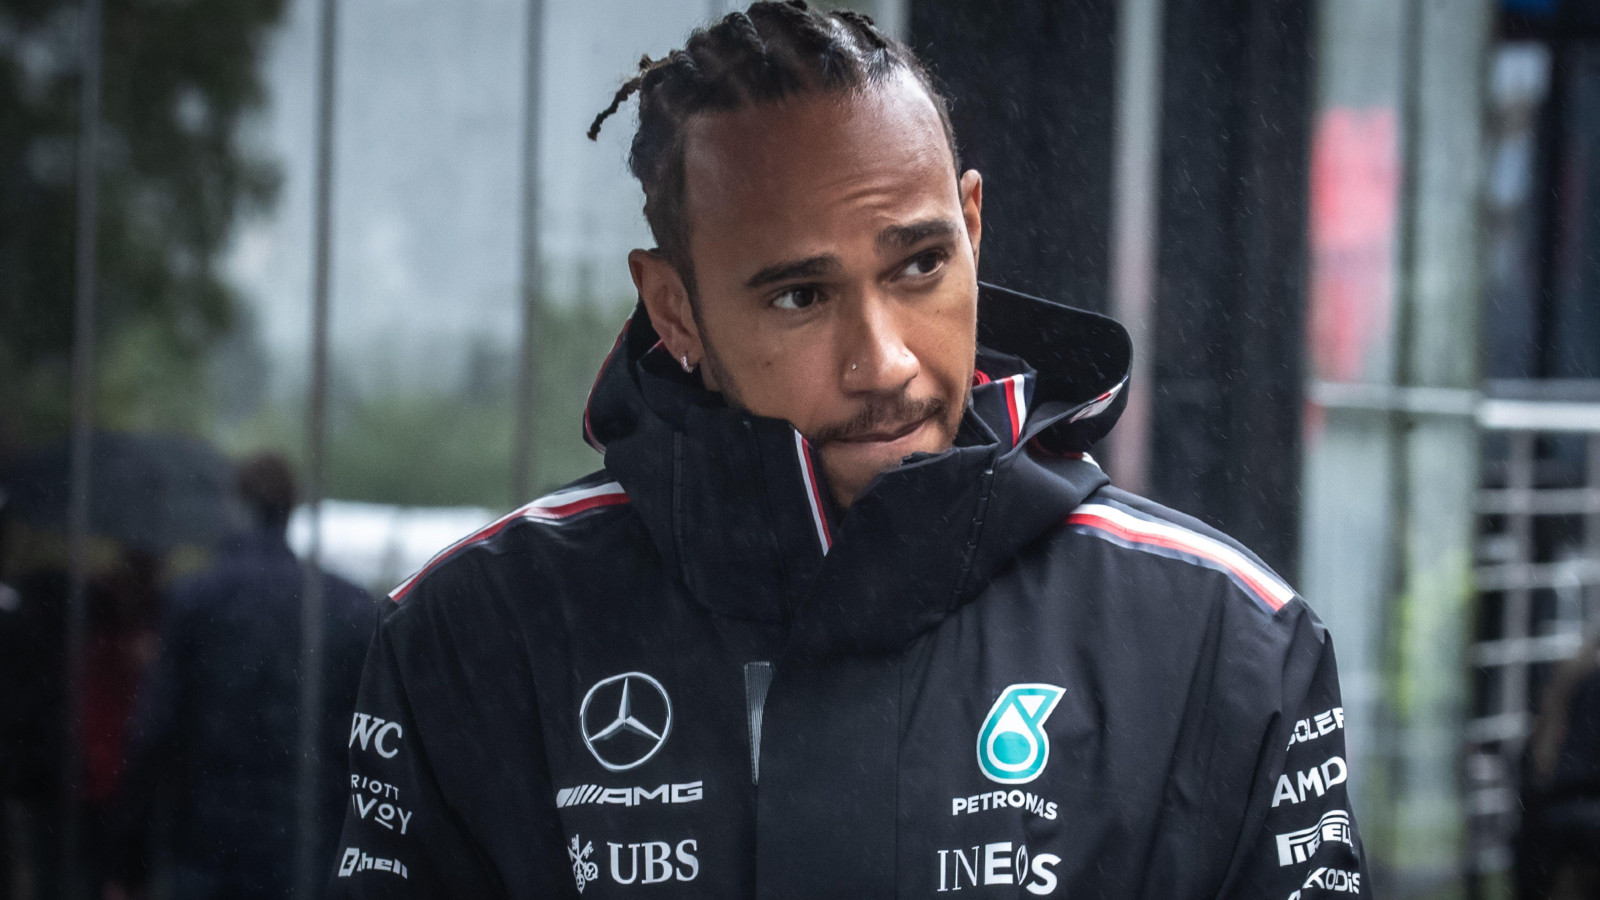 Lewis Hamilton lifts lid on Mercedes relationship after ignoring his car requests